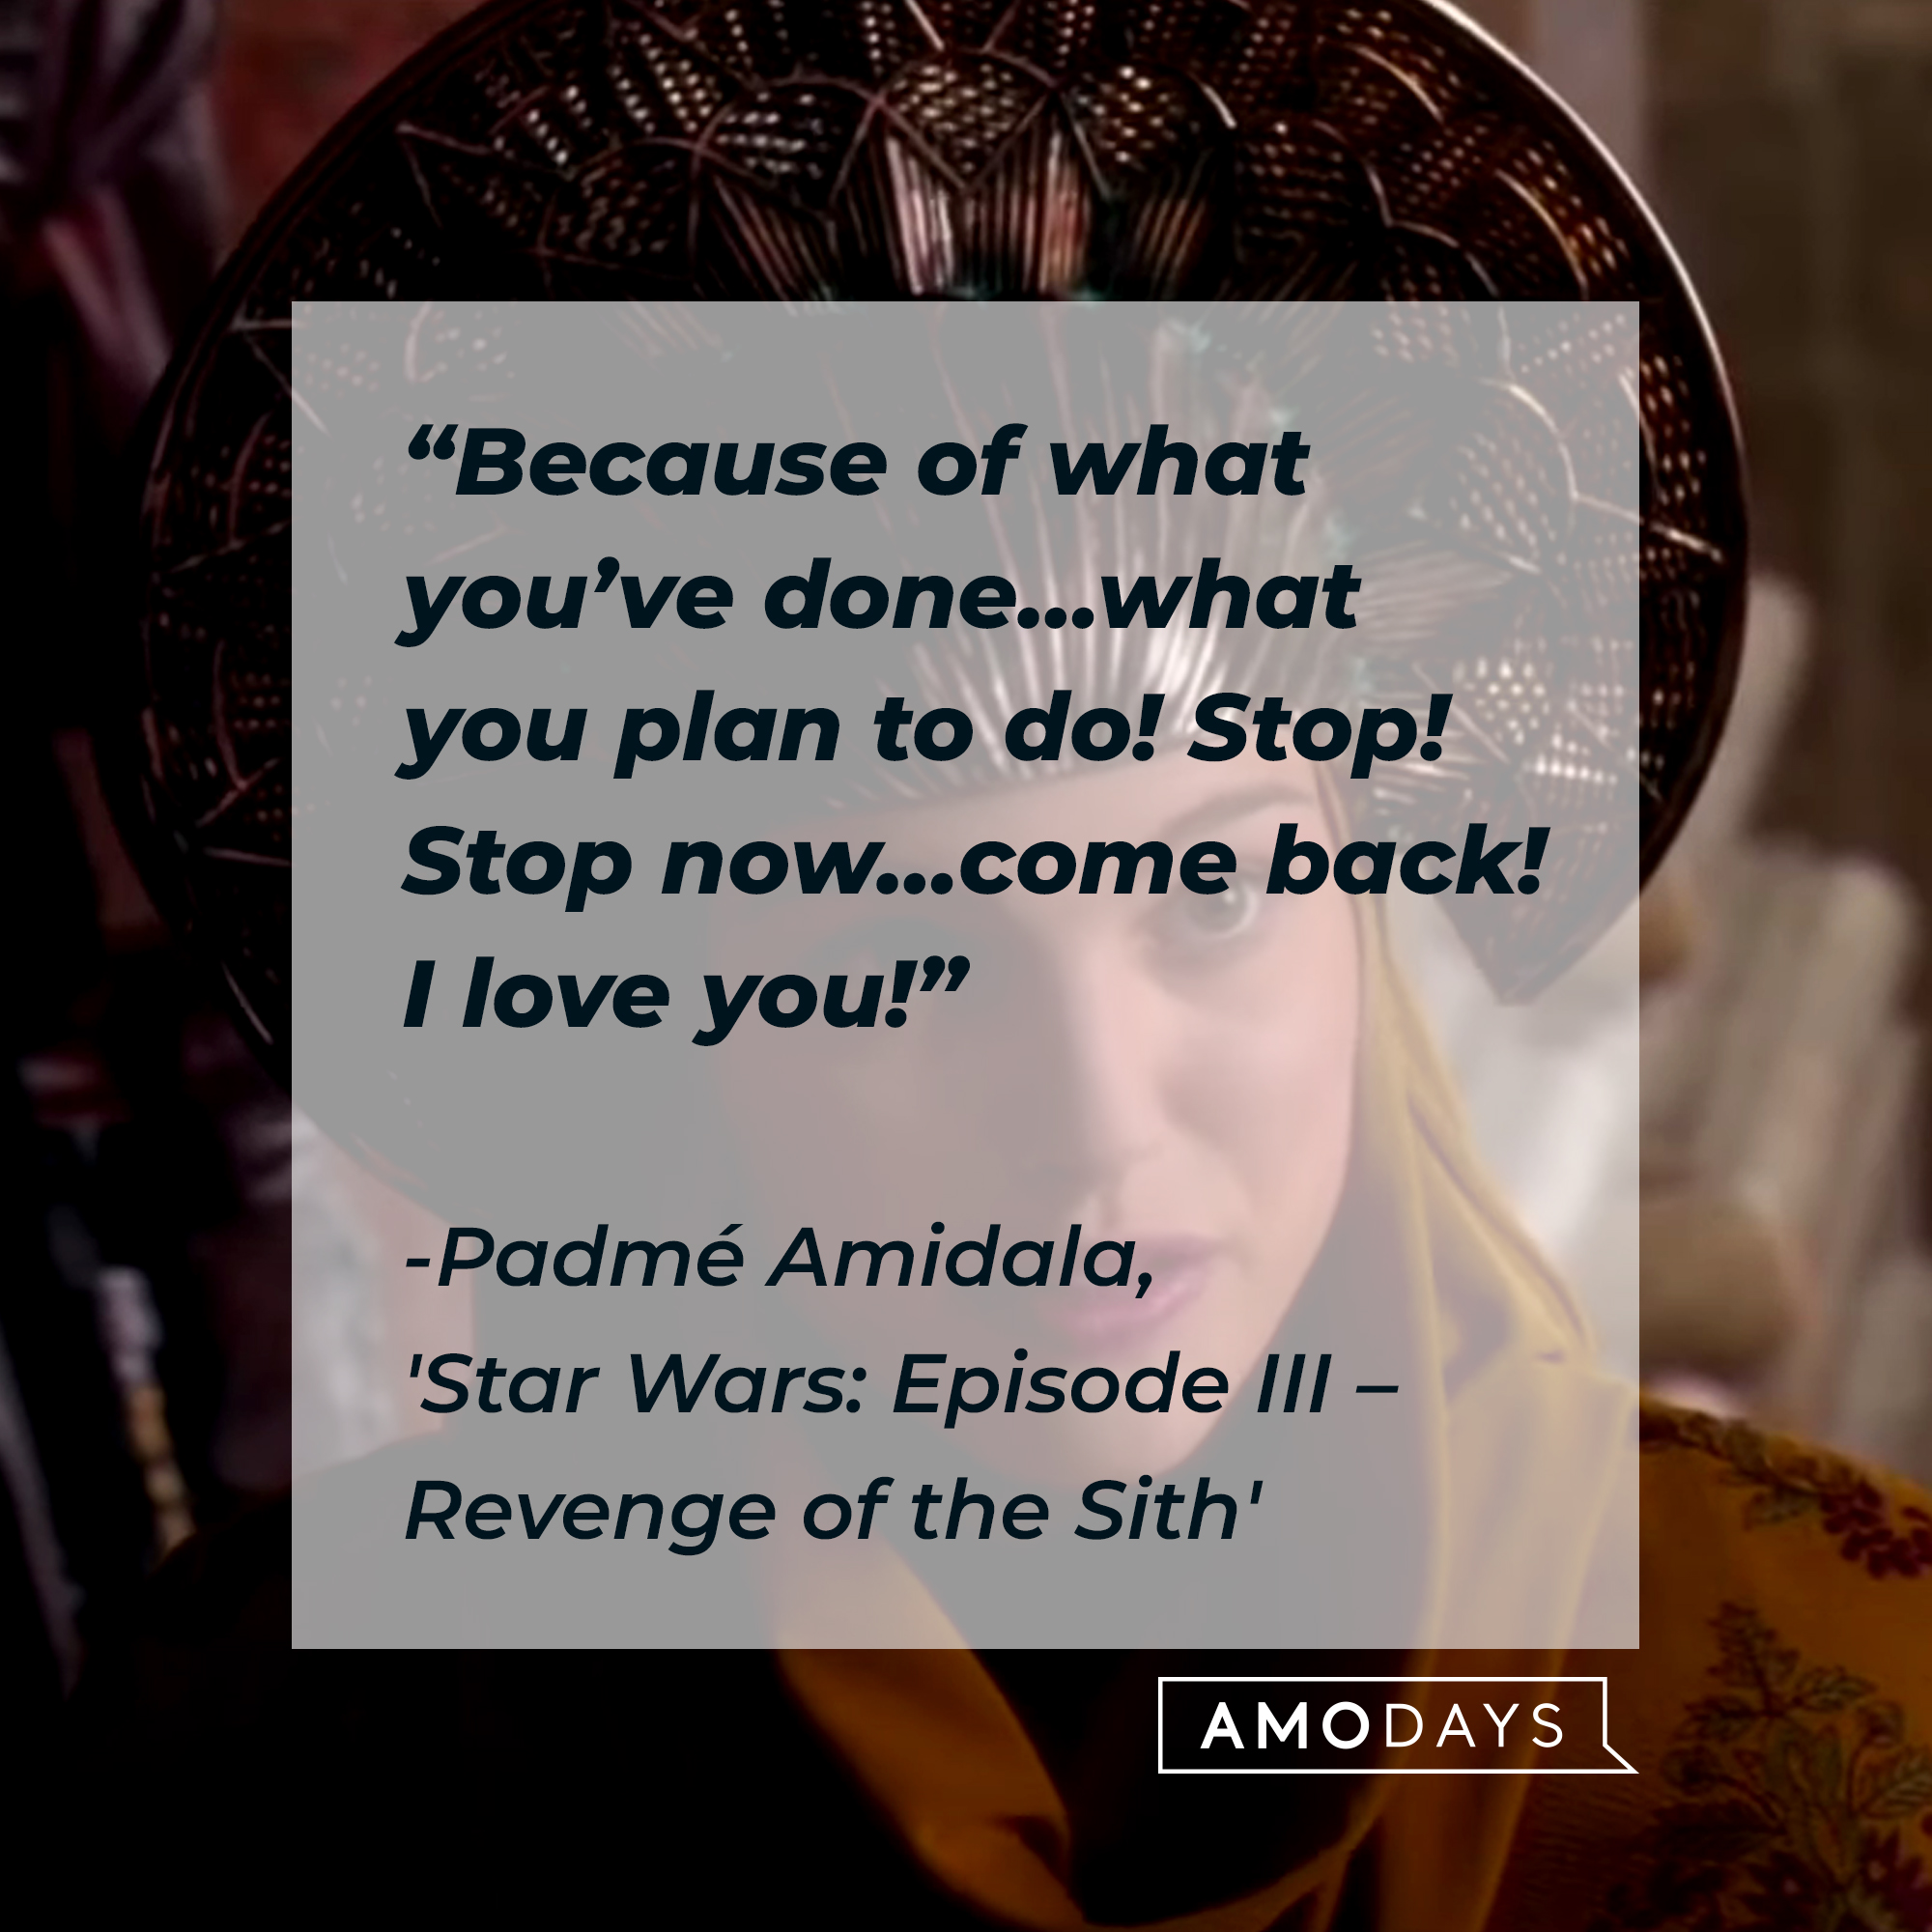 Padmé Amidala with her quote: “Because of what you’ve done… what you plan to do! Stop! Stop now… come back! I love you!” | Source: Facebook.com/StarWars